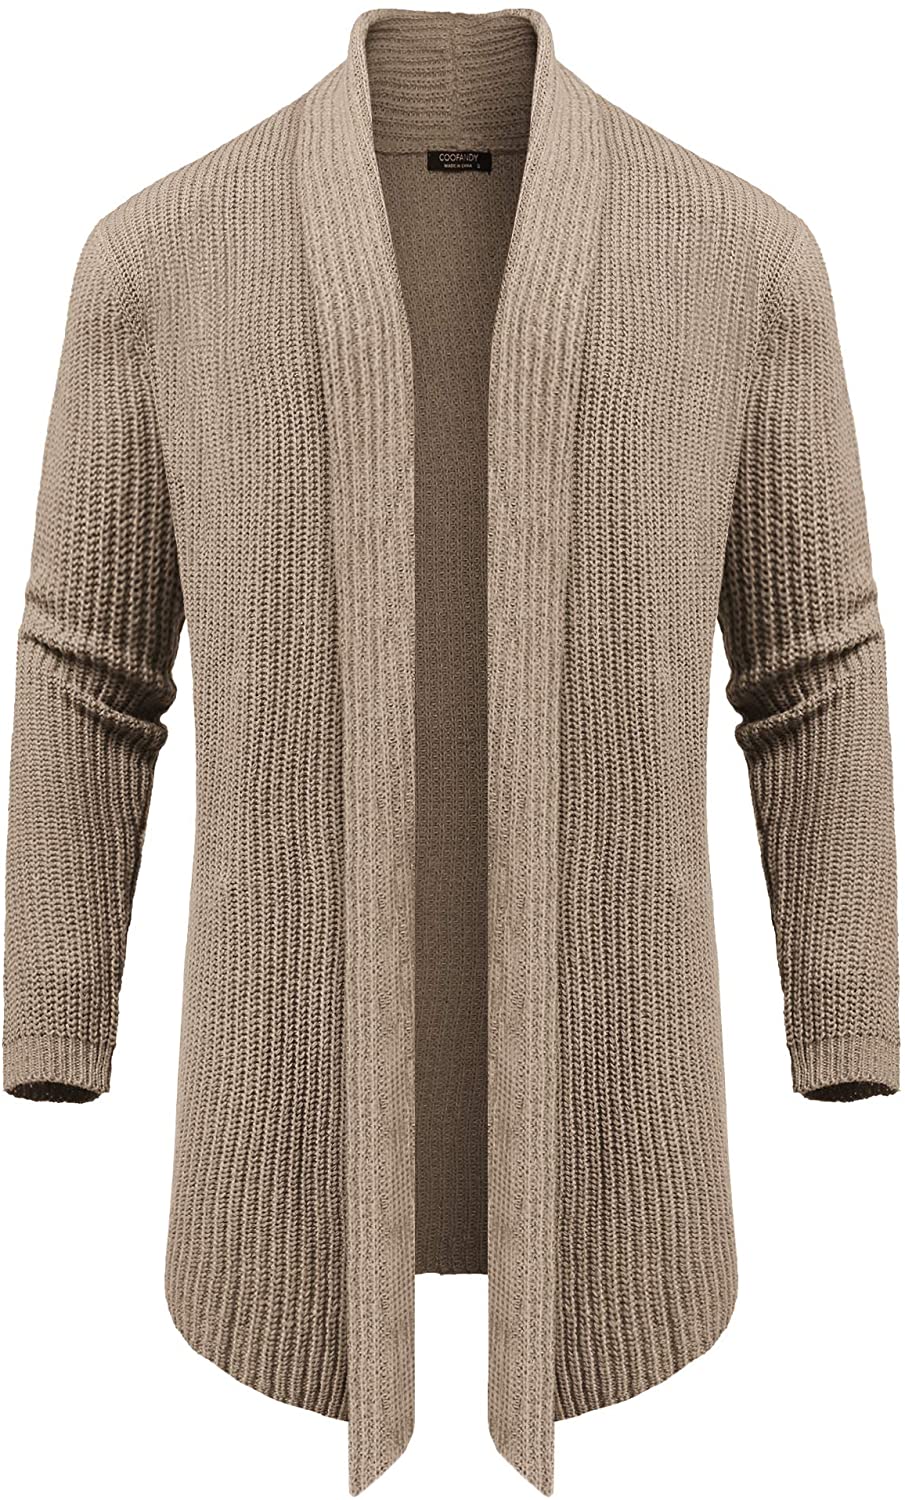 COOFANDY Mens Shawl Collar Cardigan Sweater Button Down Knitted Cardigans with Pockets 